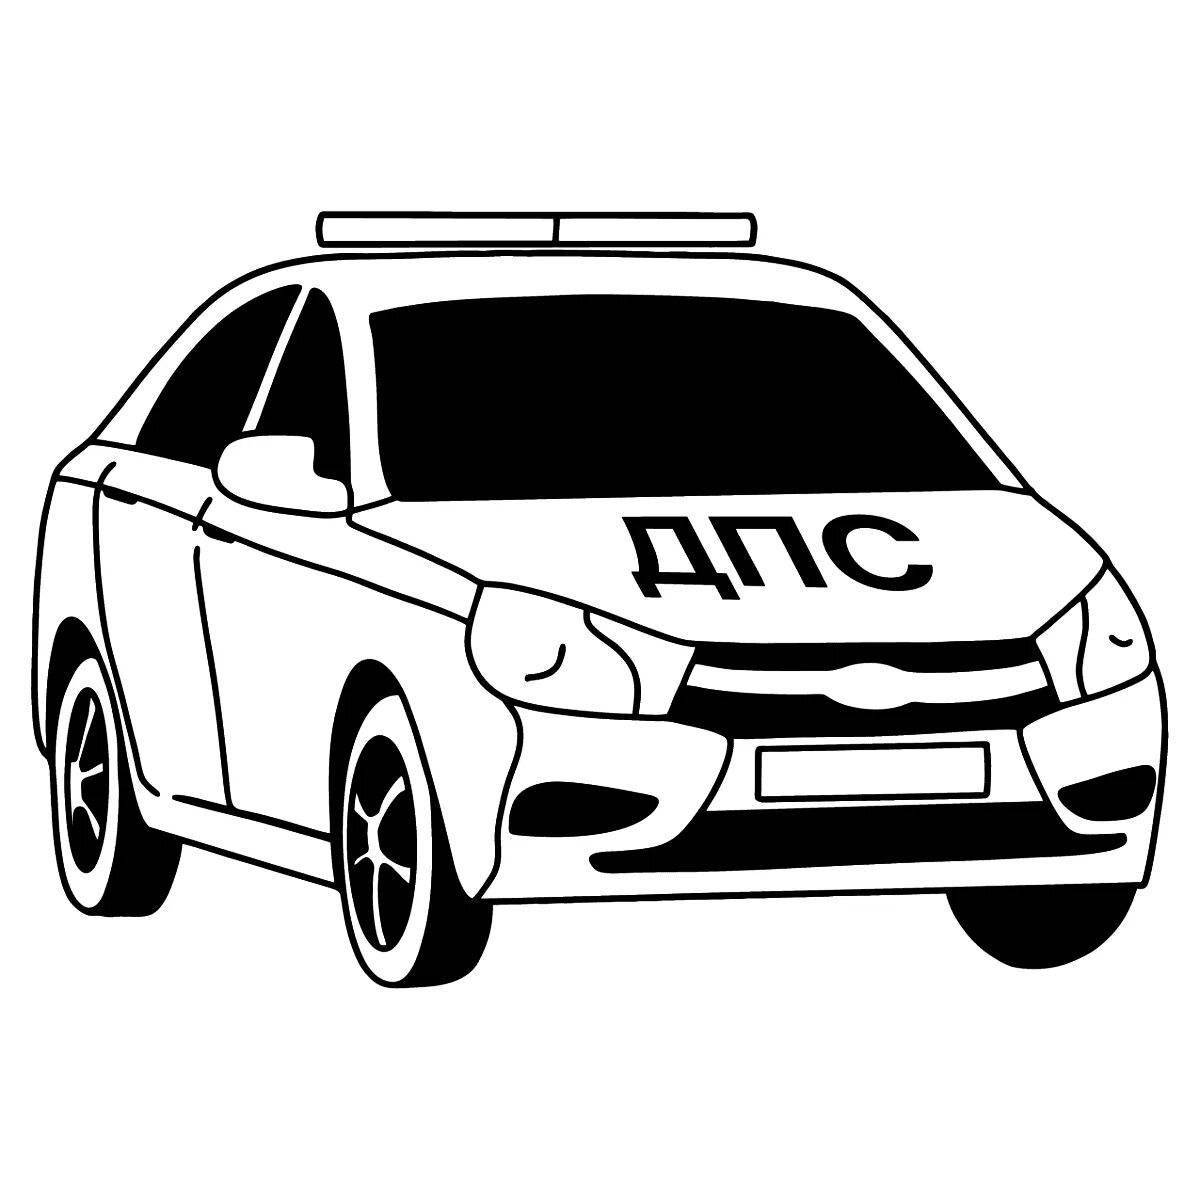 Coloring page graceful police car